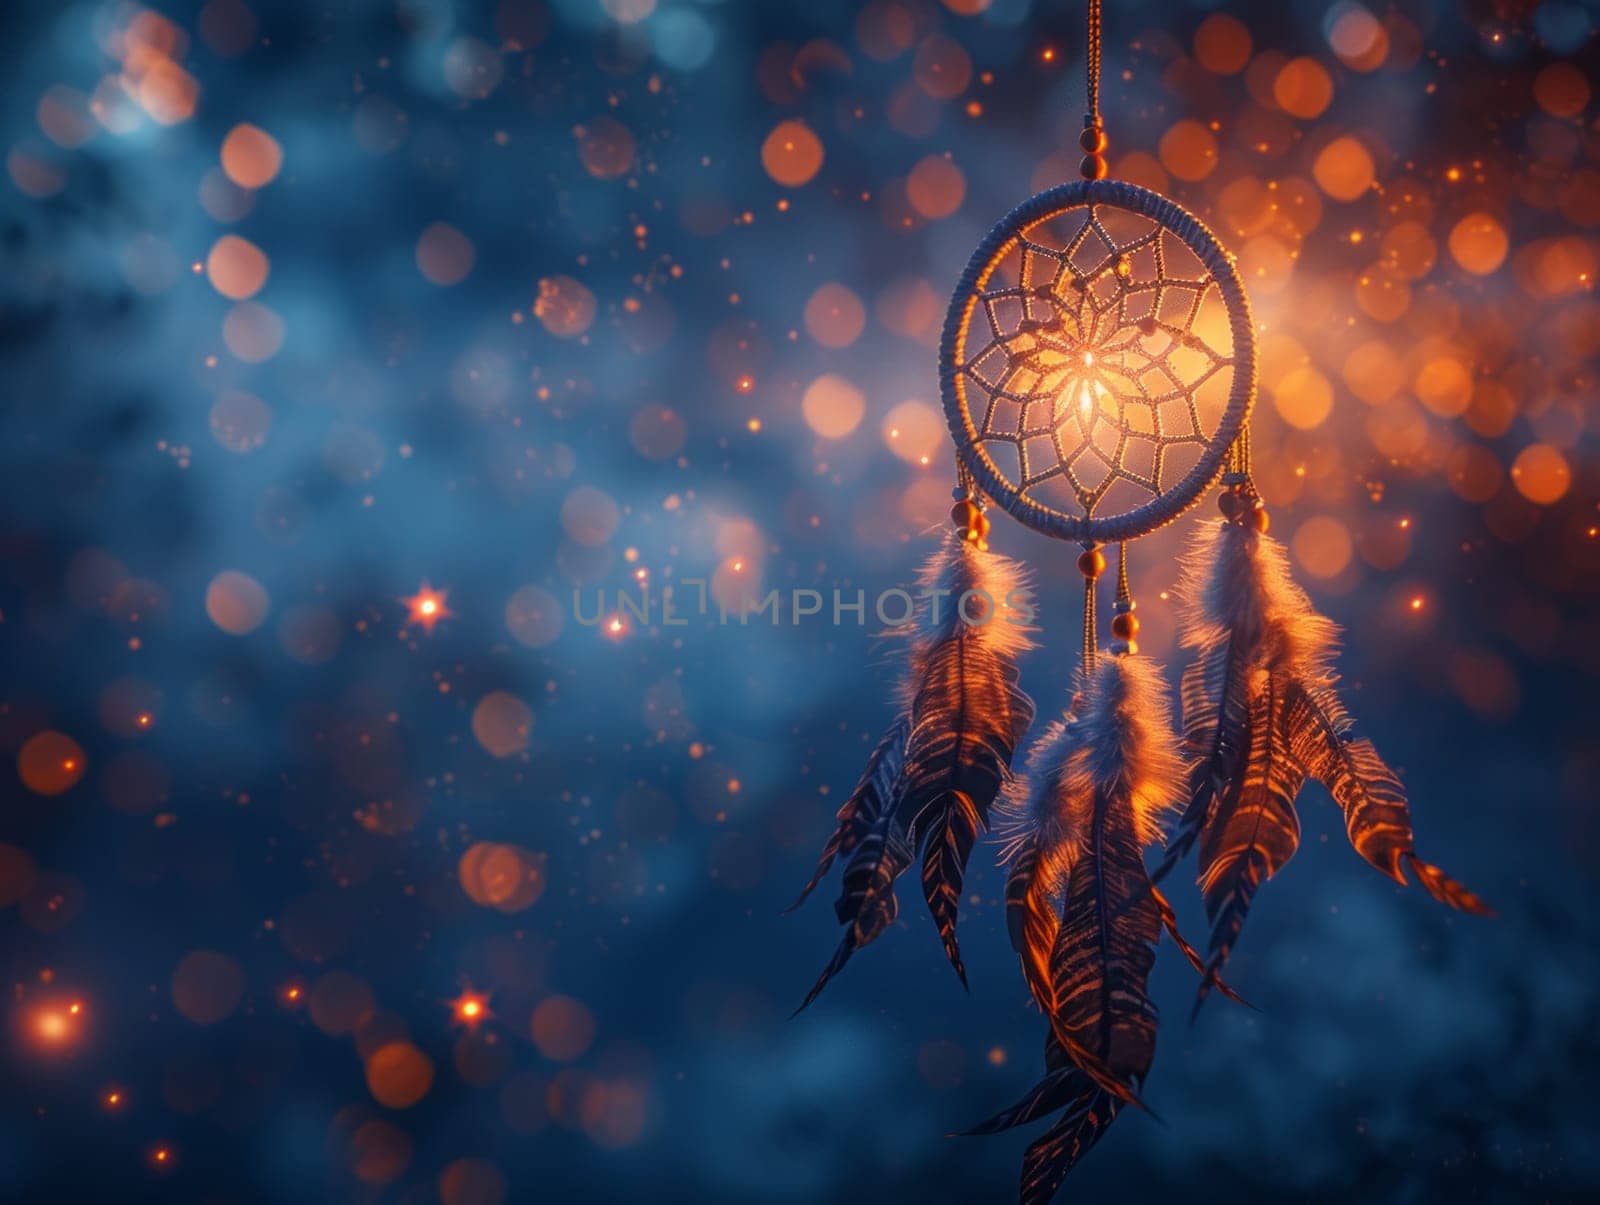 A dream catcher is suspended on a string, with soft lights glowing in the background, creating a magical and mystical ambiance.